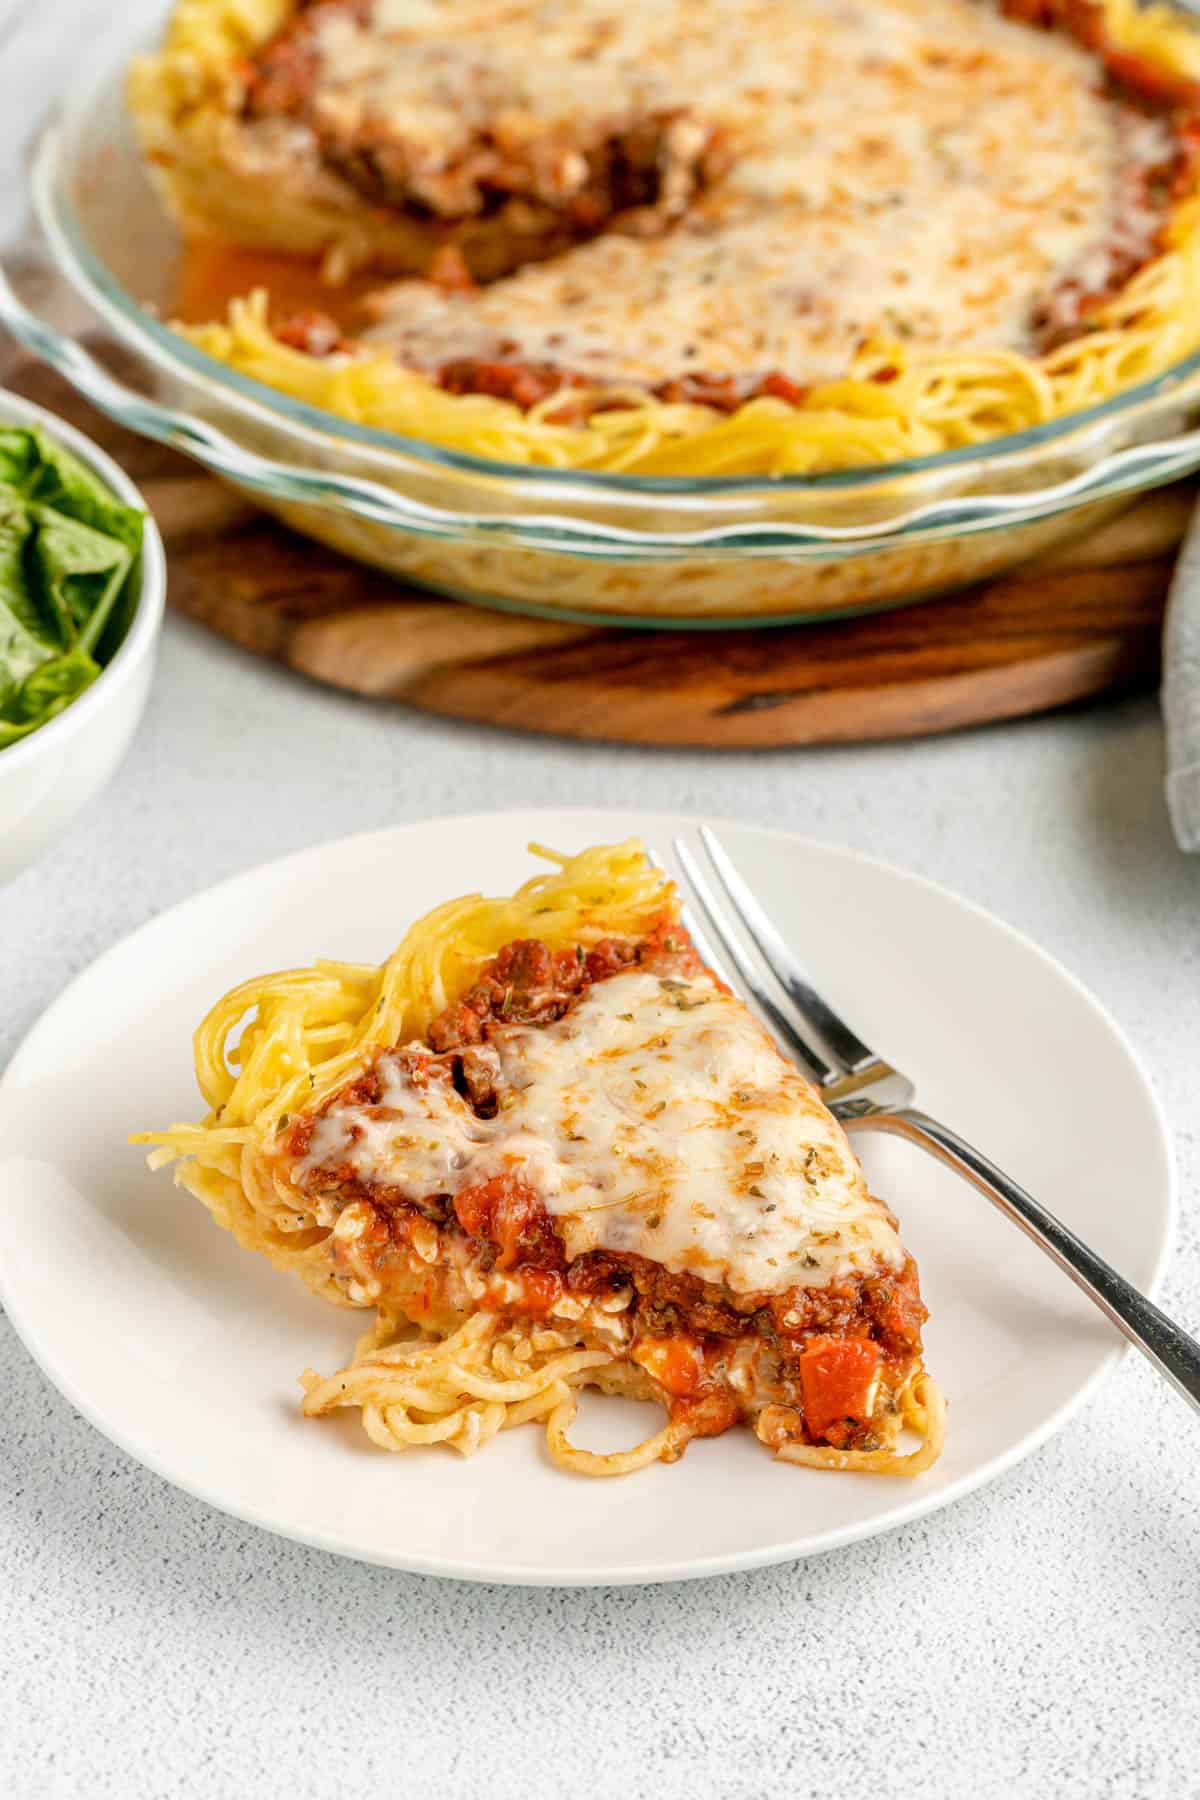 A slice of spaghetti pie on a white plate with a fork in front of the pie dish it was baked in.